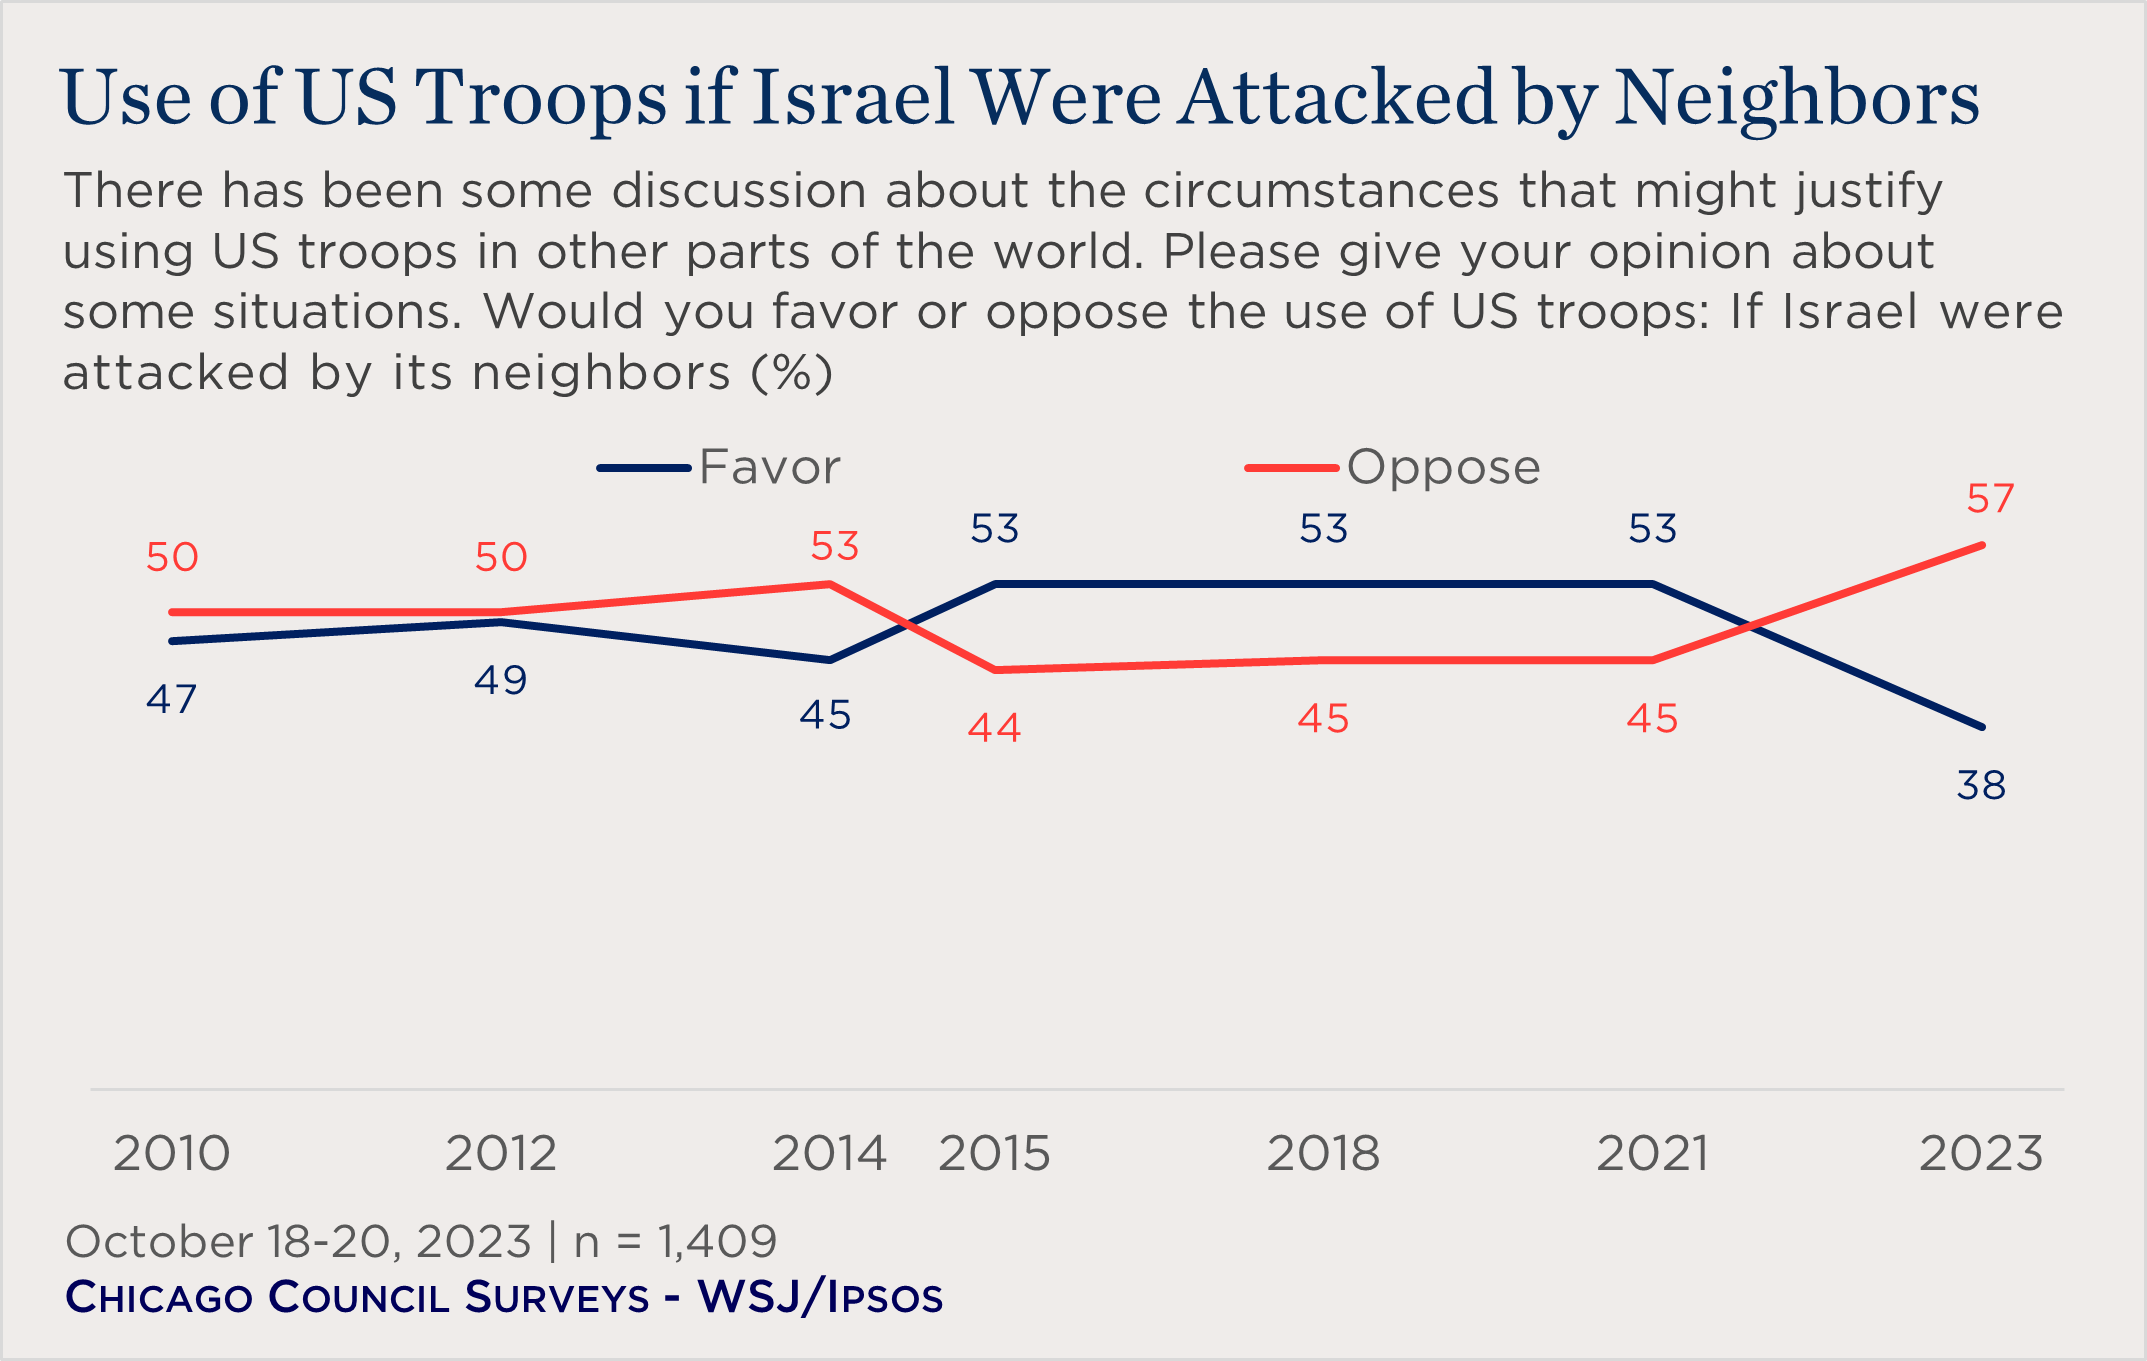 bar chart showing US views on the use of US troops if Israel were attacked